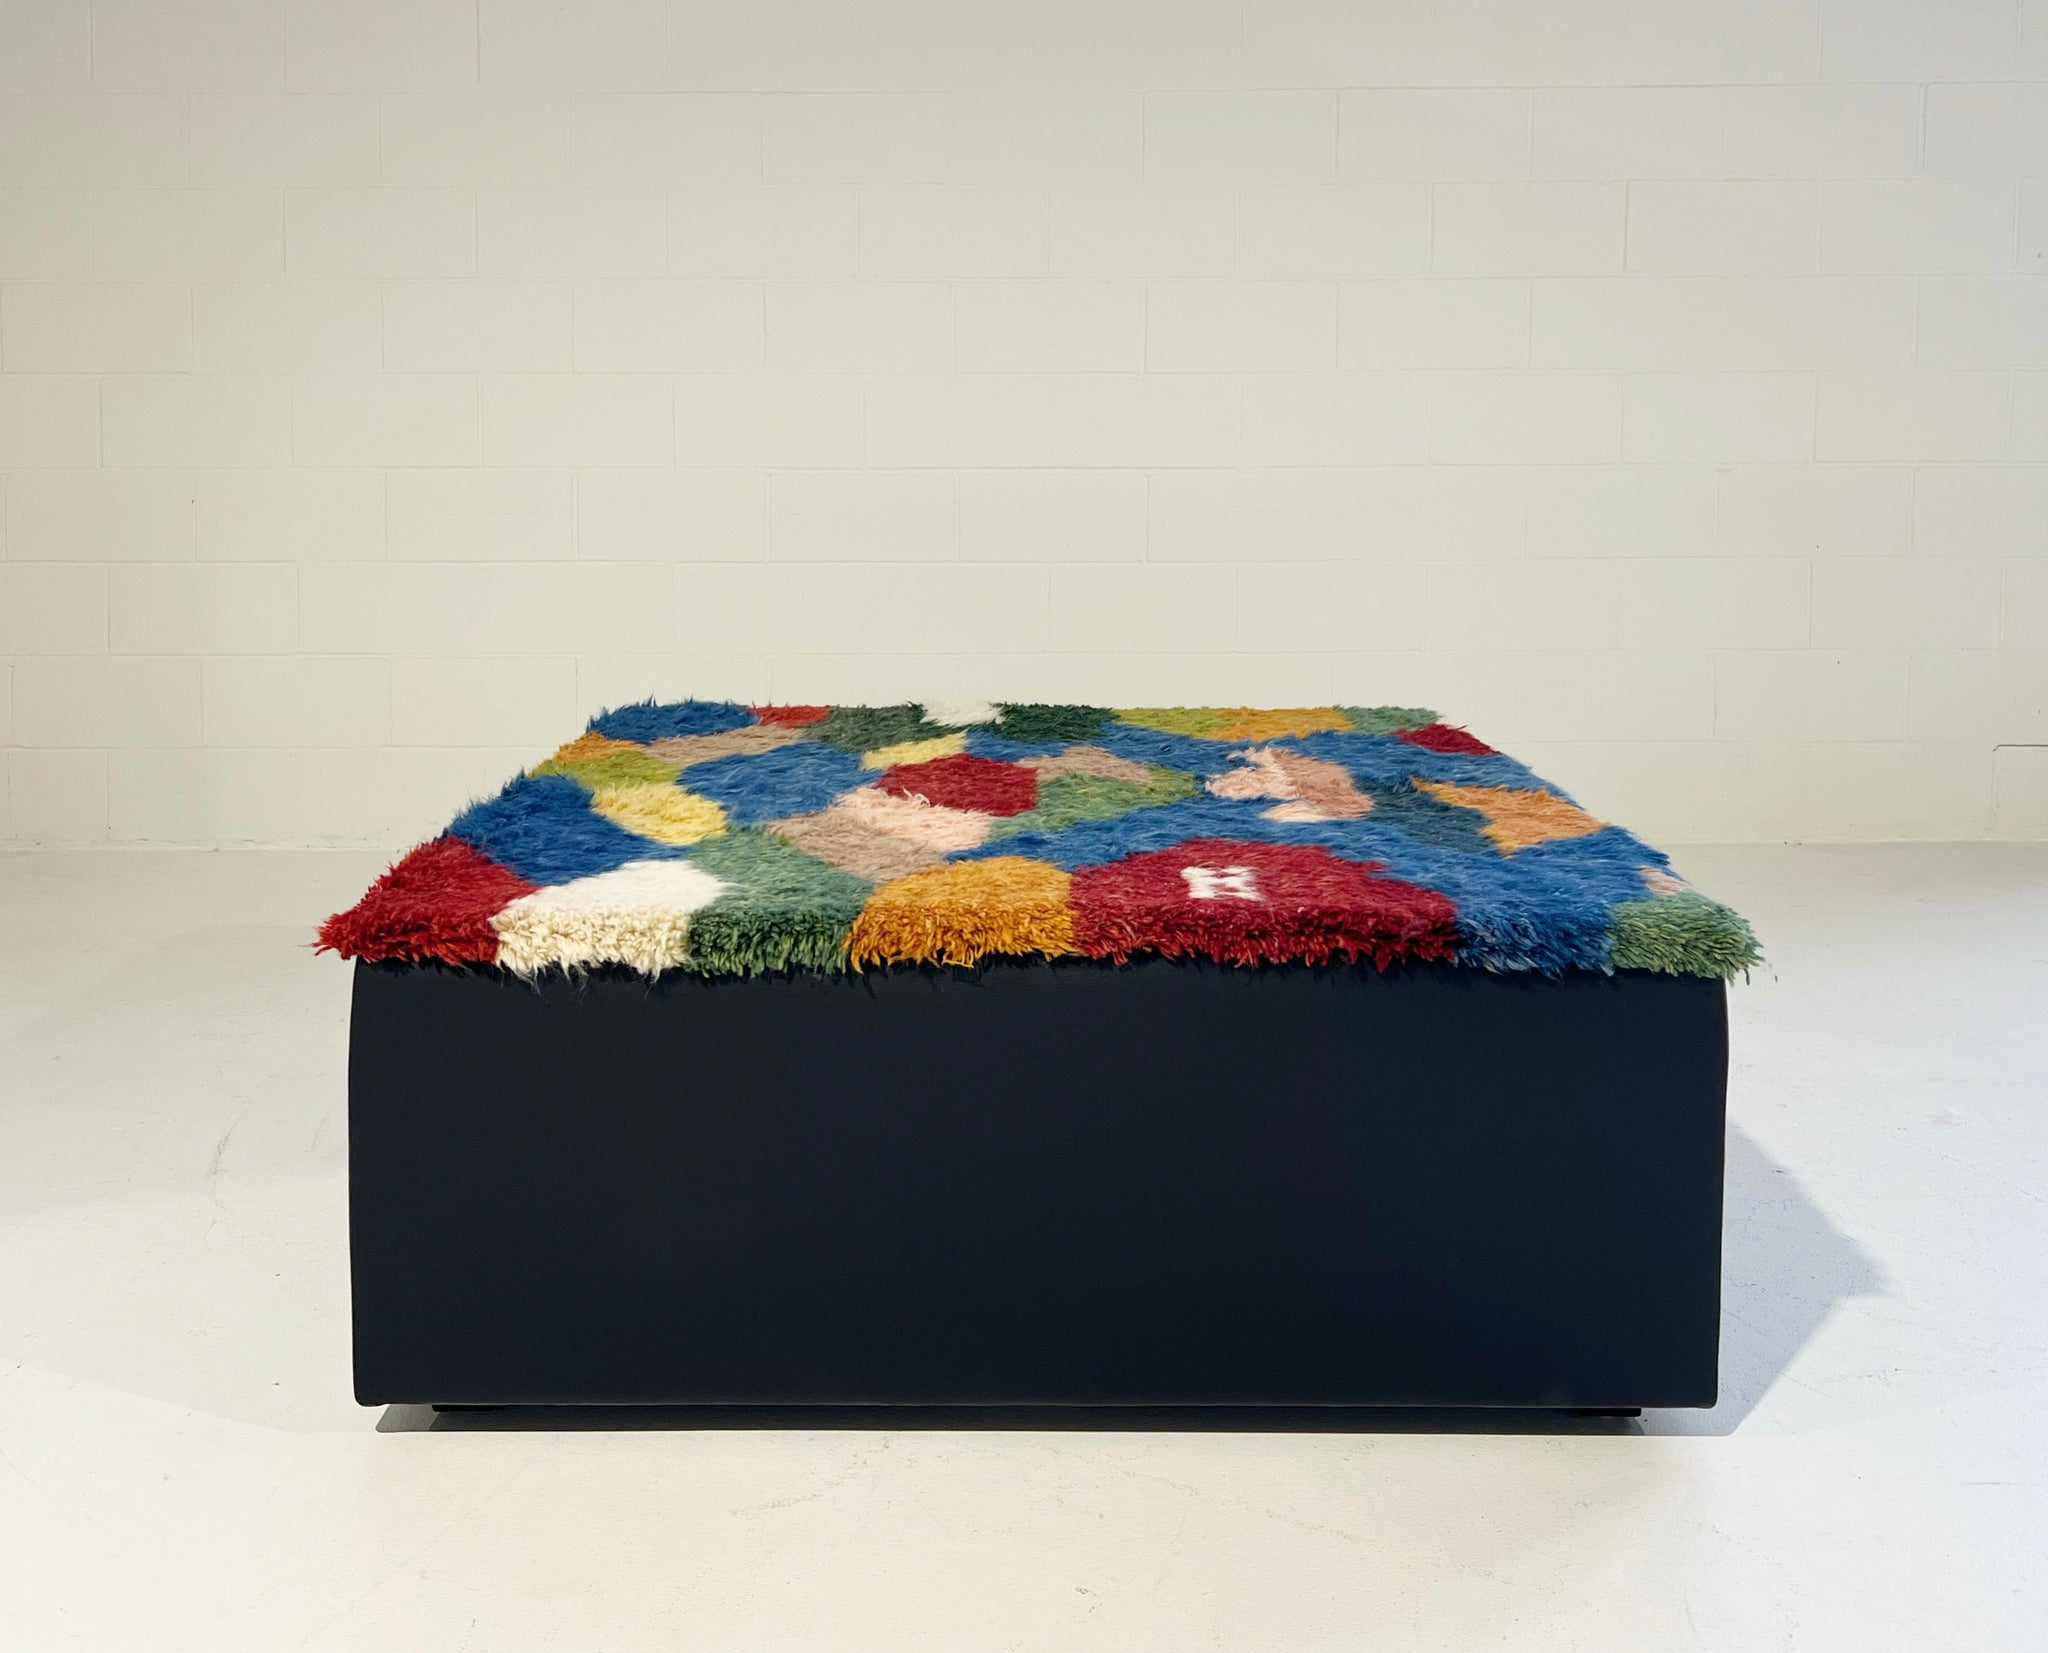 One-of-a-Kind Ottoman with Vintage Qashqai Gabbeh Rug from Iran